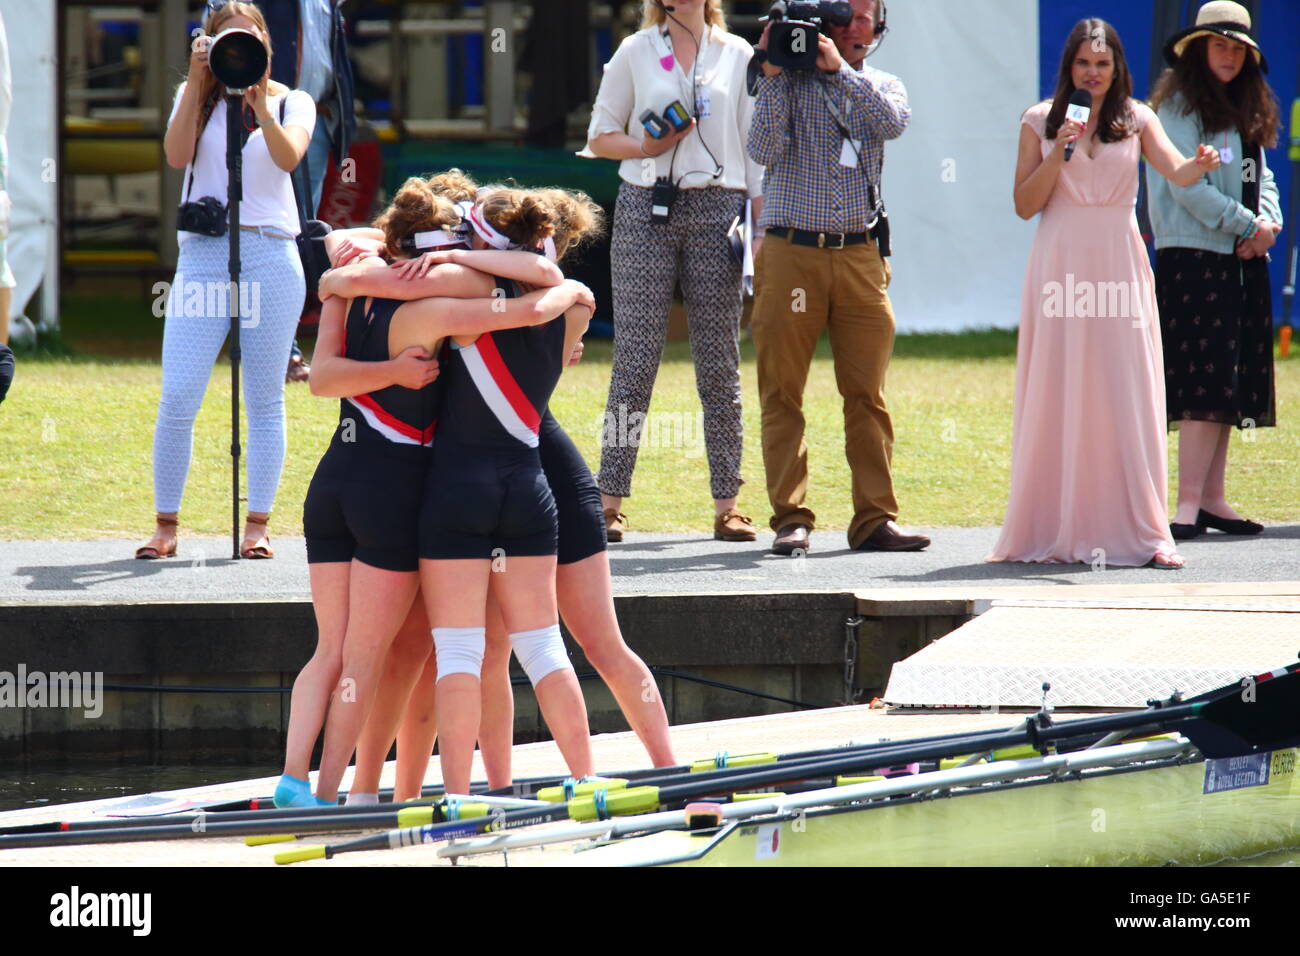 Rowers from all over the world came to the annual Henley Royal Regatta 2016. Gloucester Rowing Club celebrates their victory in the first race of the day. Stock Photo